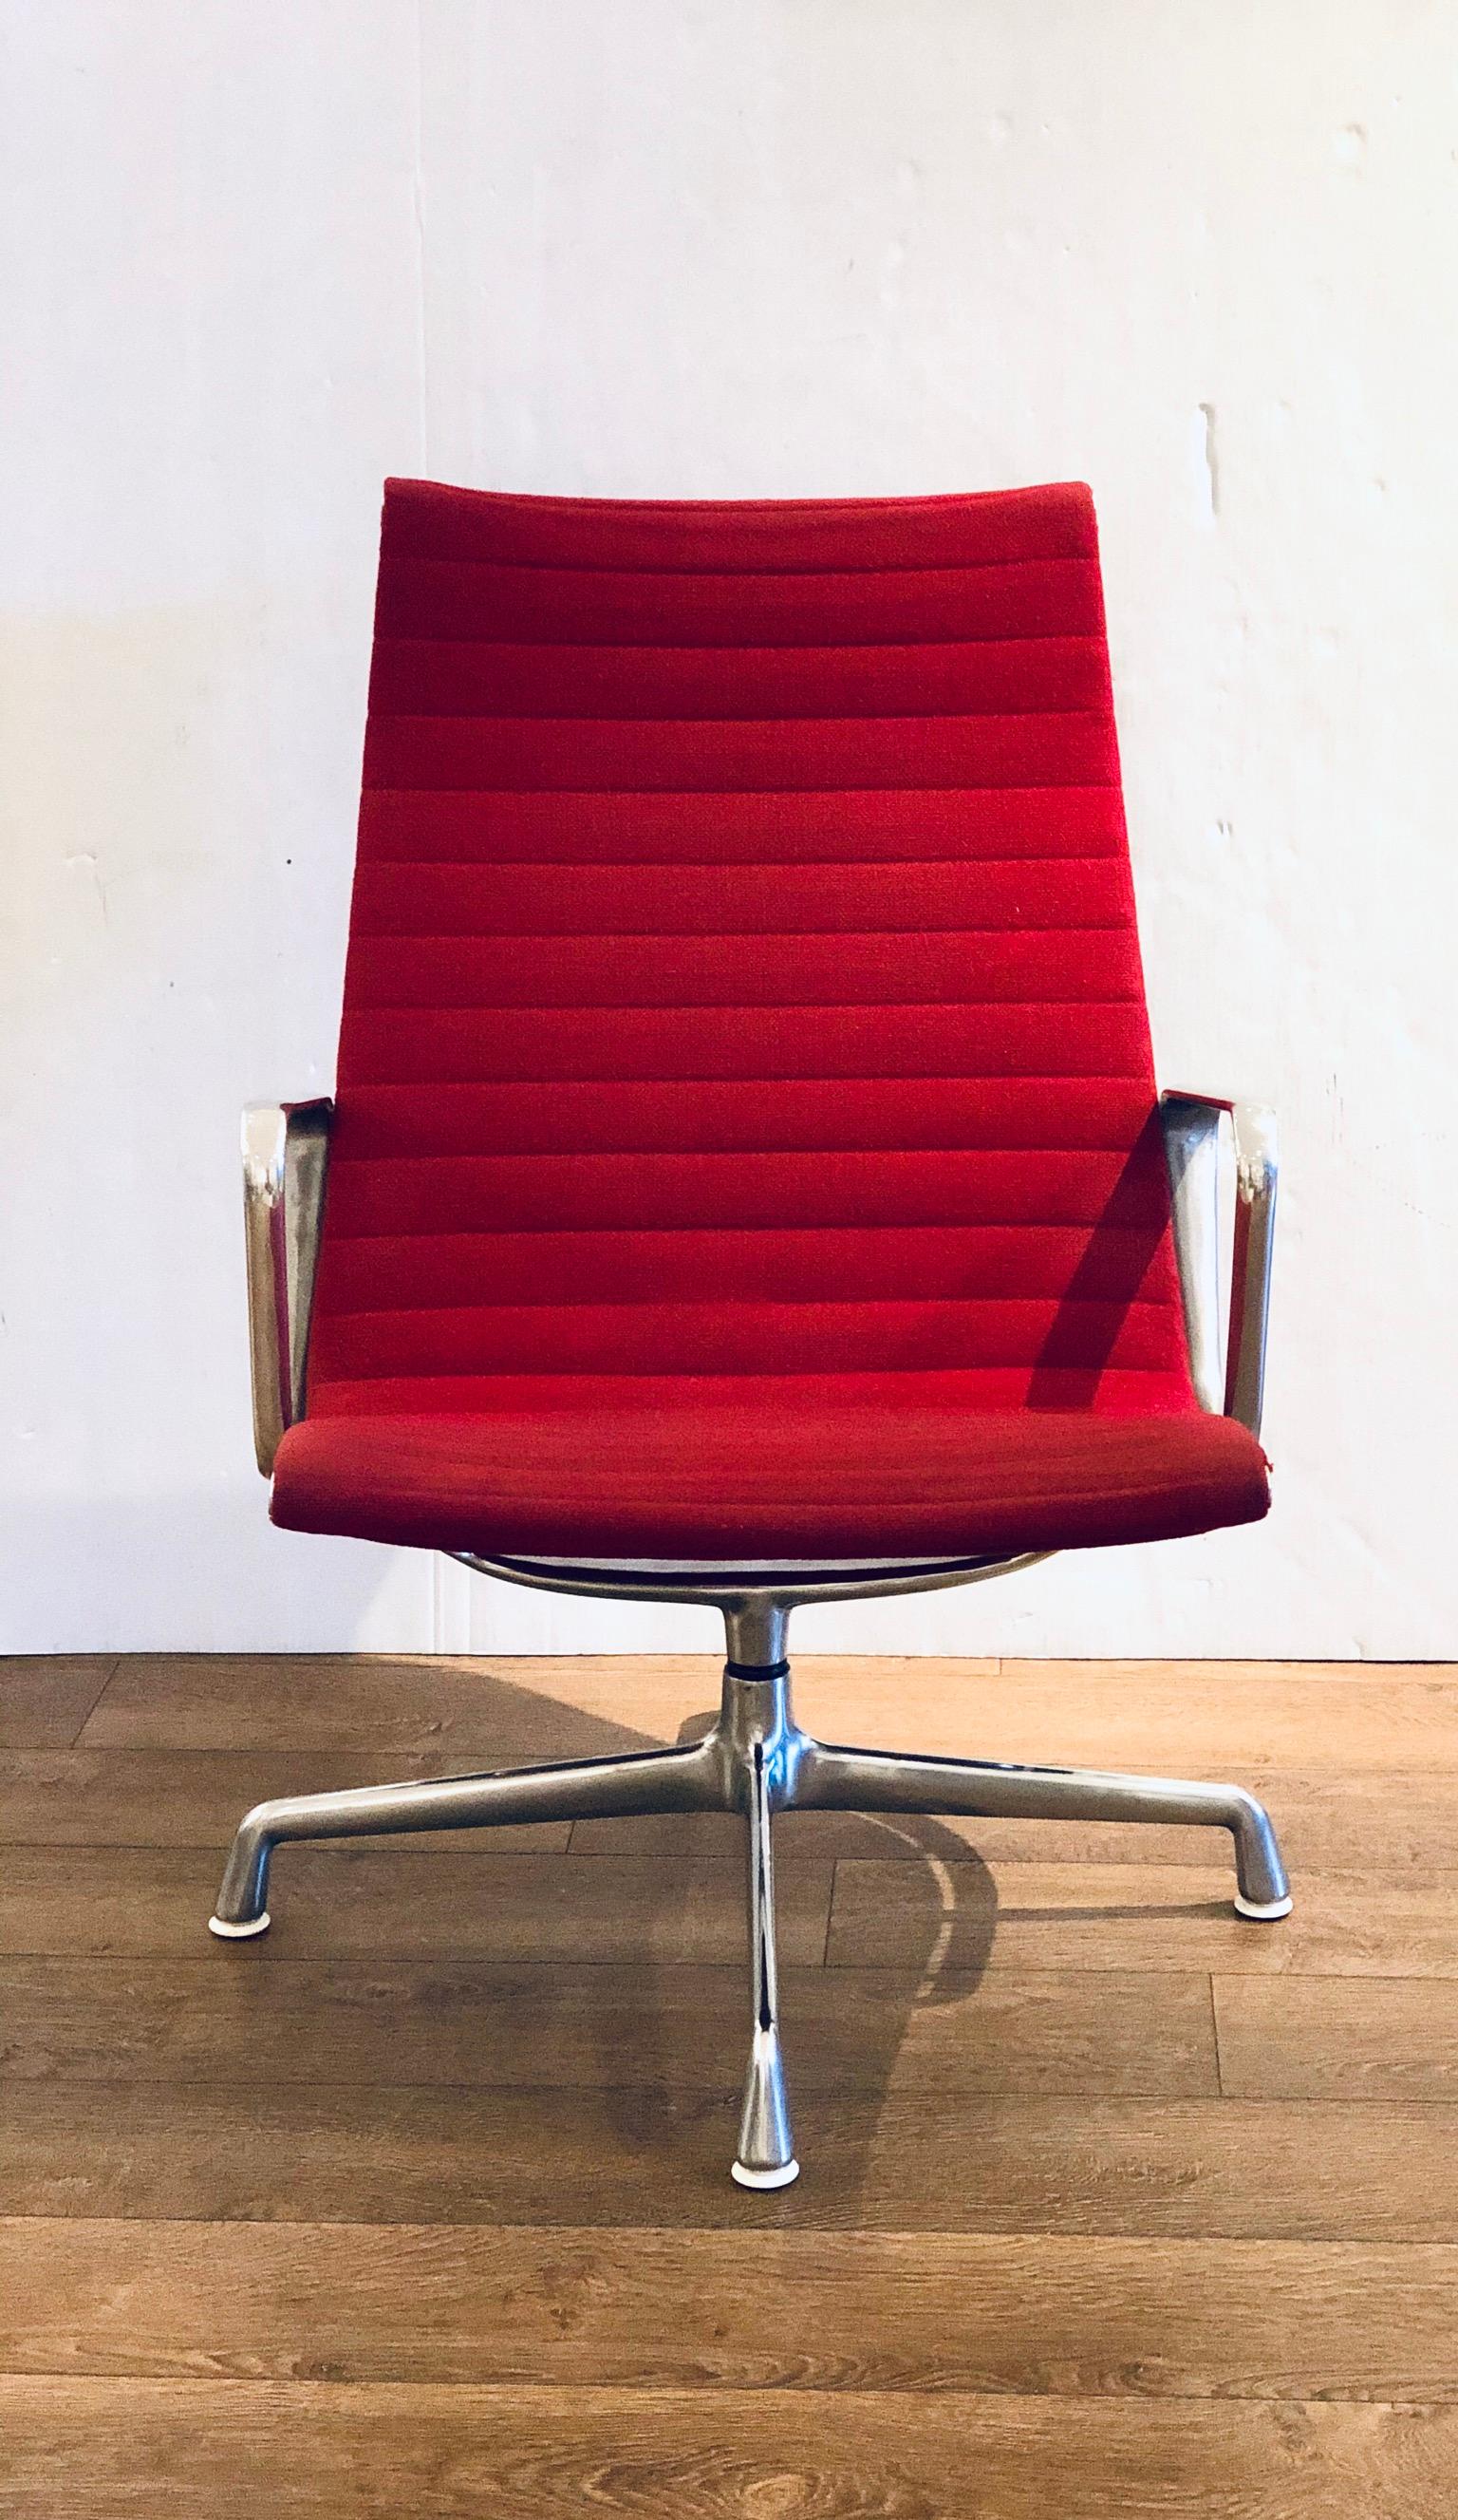 Eames Herman Miller aluminum group executive chair, in red fabric circa 1990s swivel to 360 degrees, very nice condition some worn on the red fabric as shown overall very clean. It does not recline.